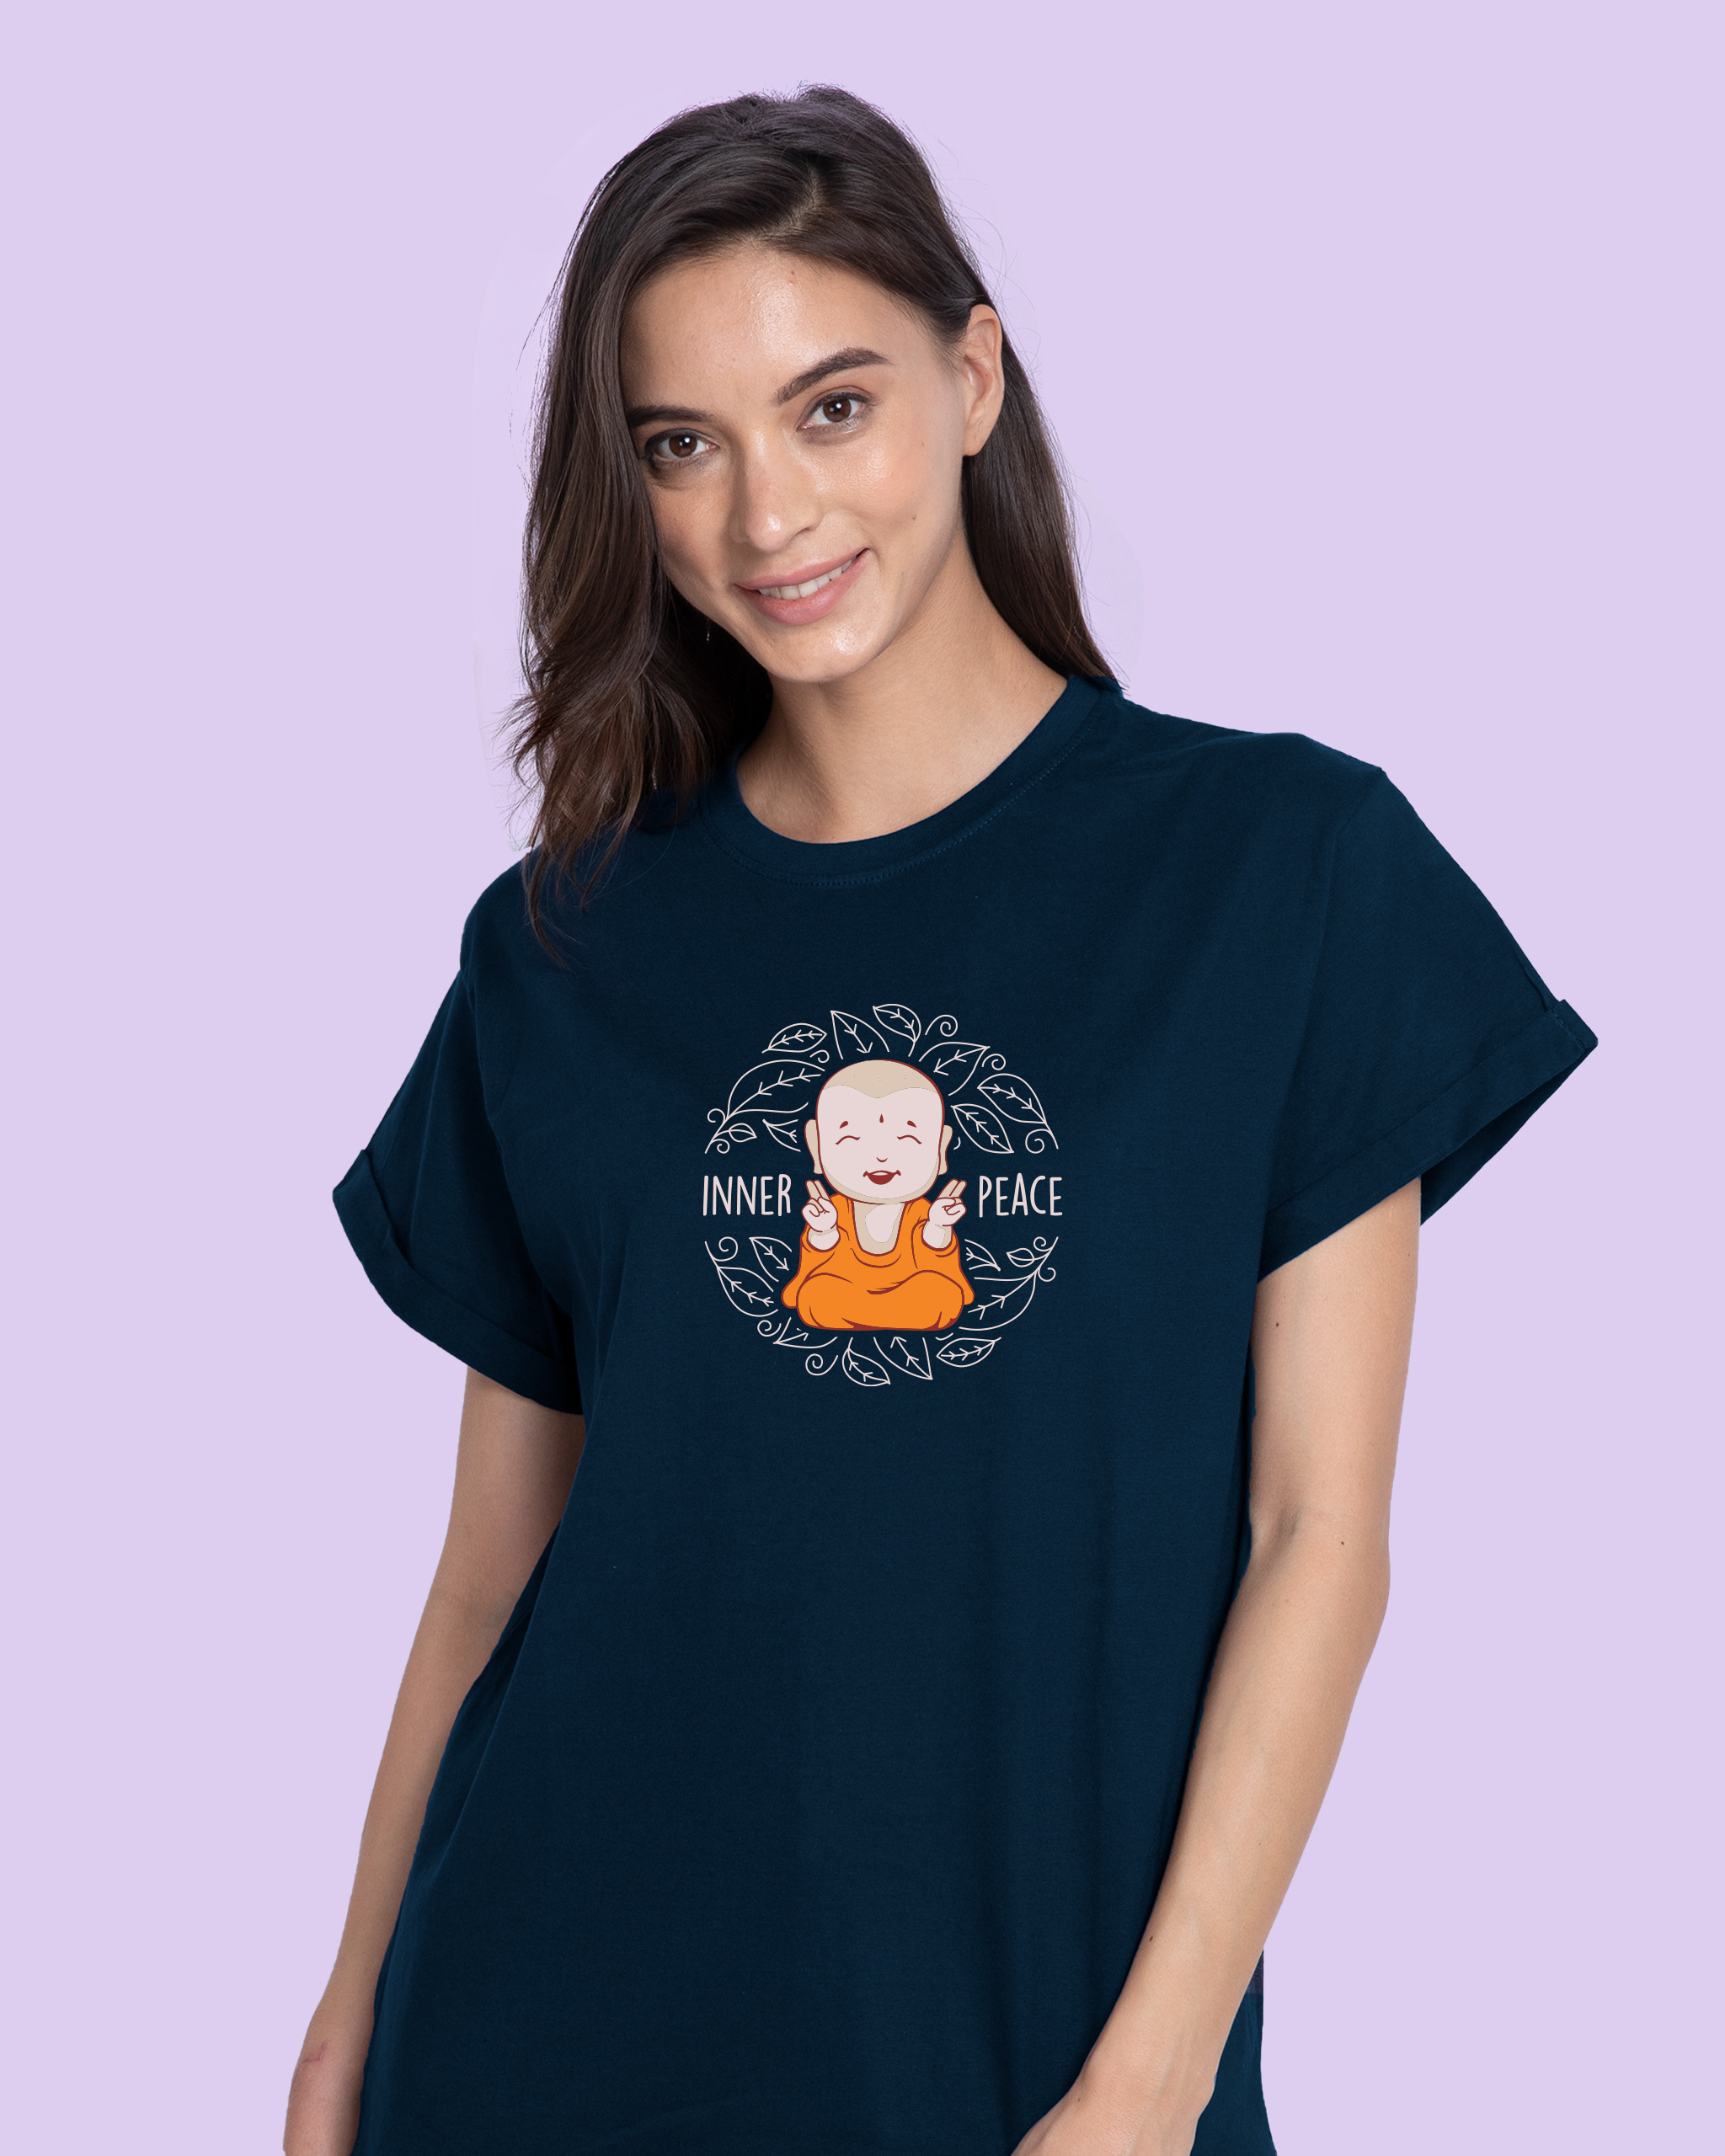 peace t shirts online india